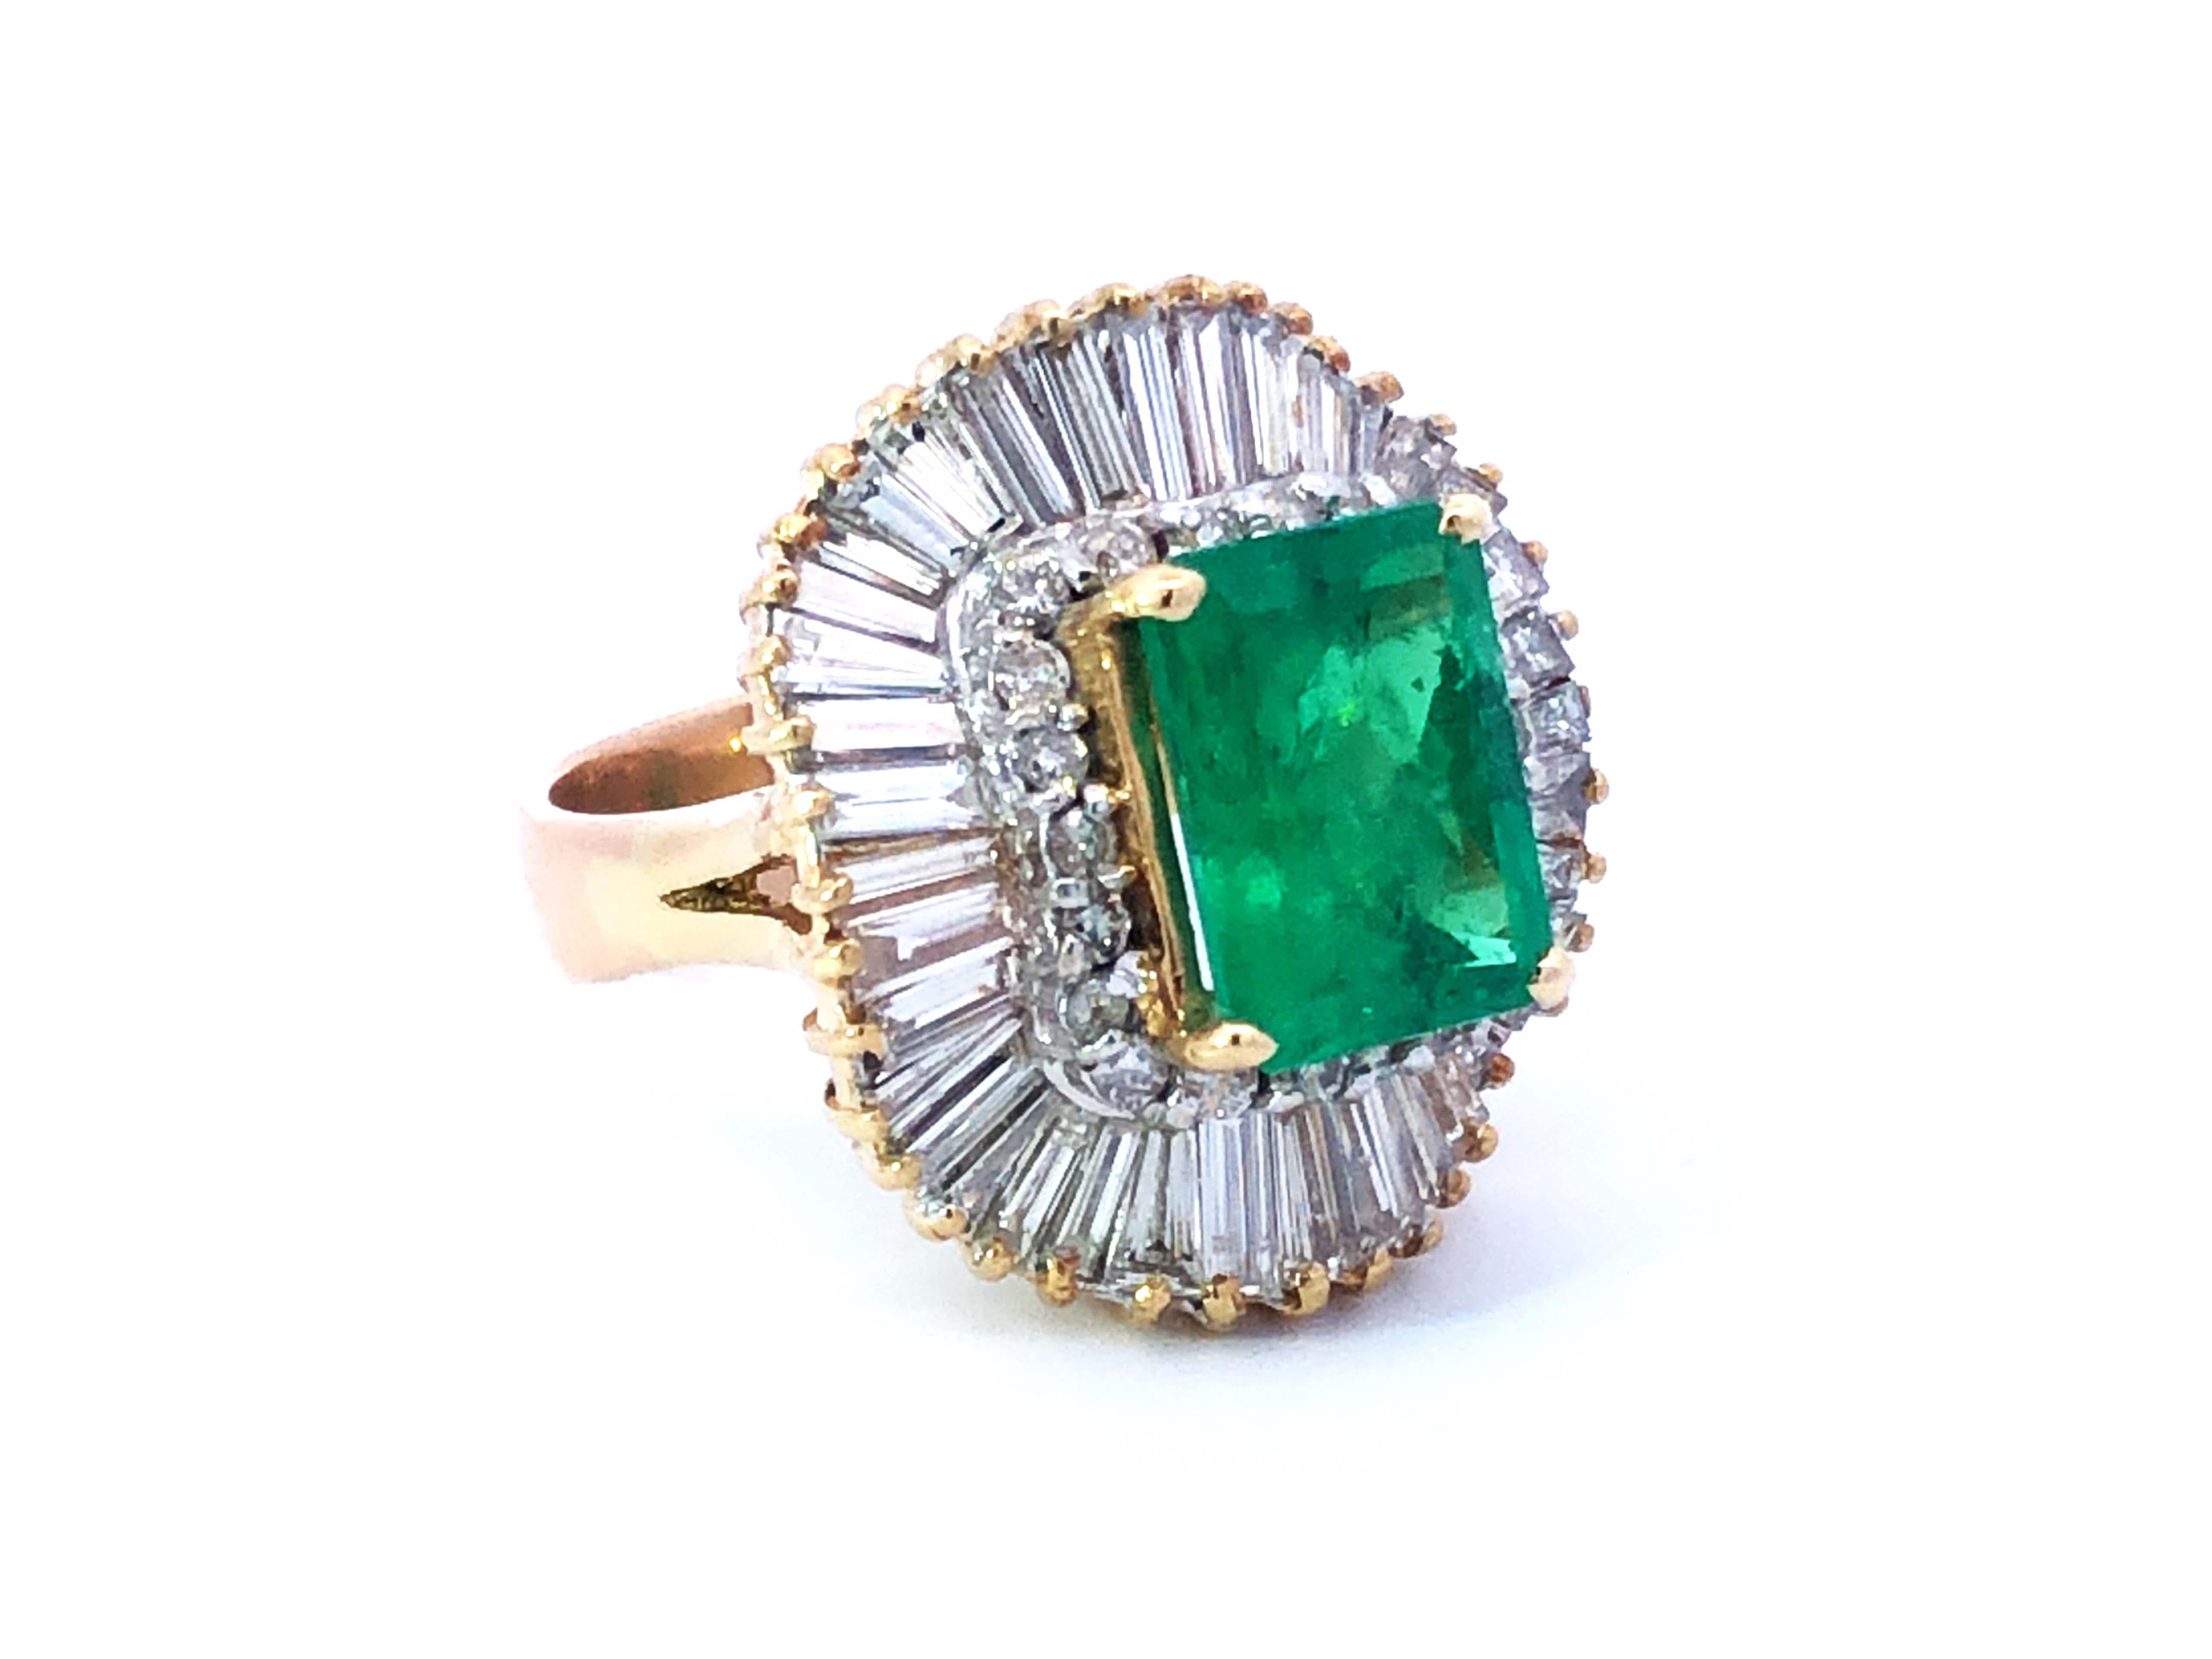 GIA Rare 4 ct. Colombian Emerald & Diamond Ballerina Ring in 18k Yellow Gold In Excellent Condition For Sale In Honolulu, HI